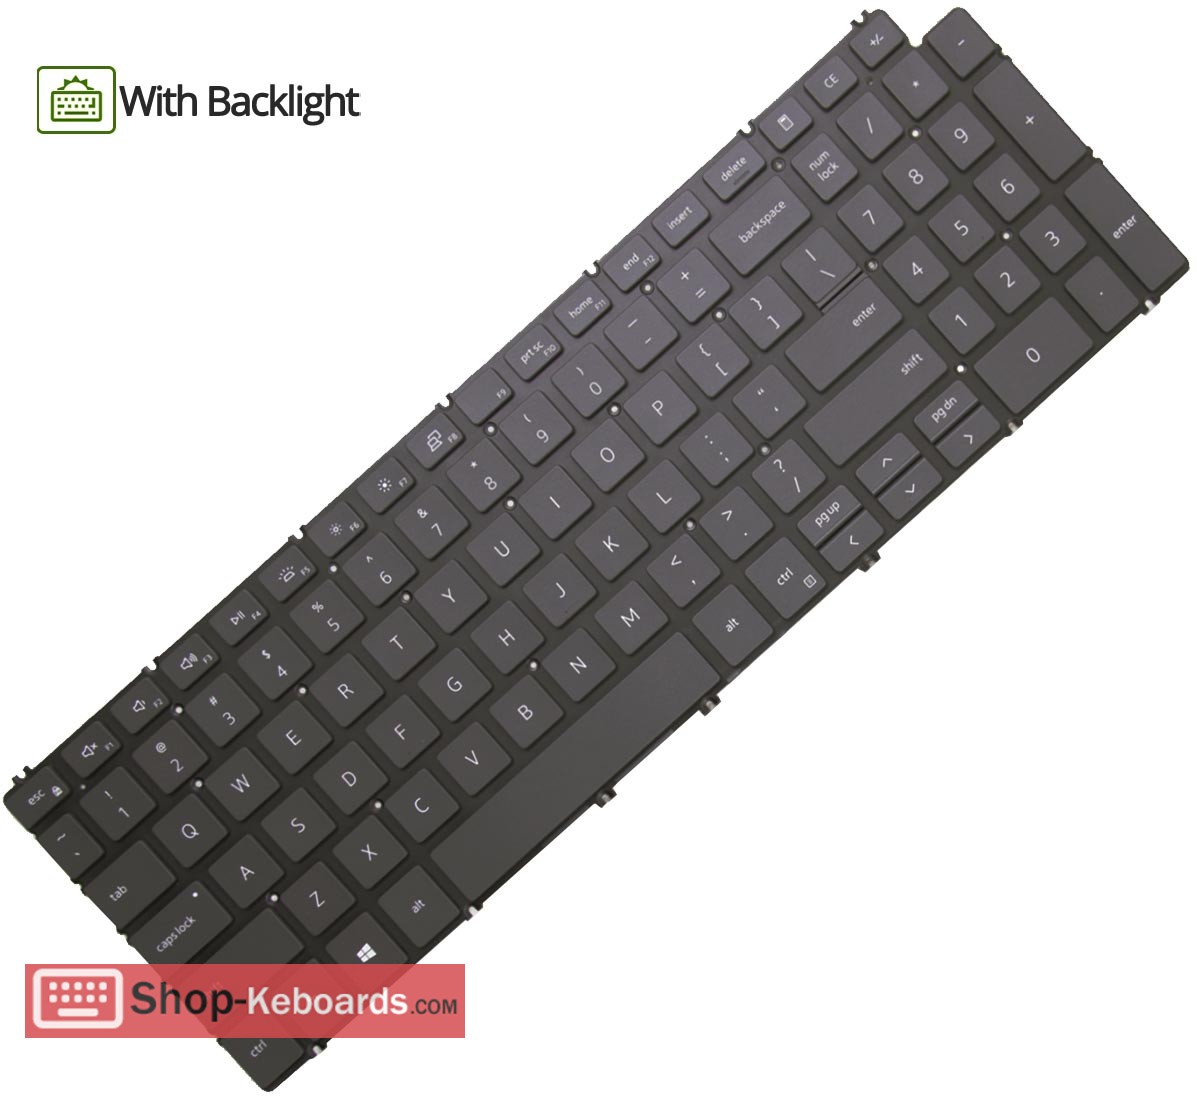 Dell G15 5505 Keyboard replacement